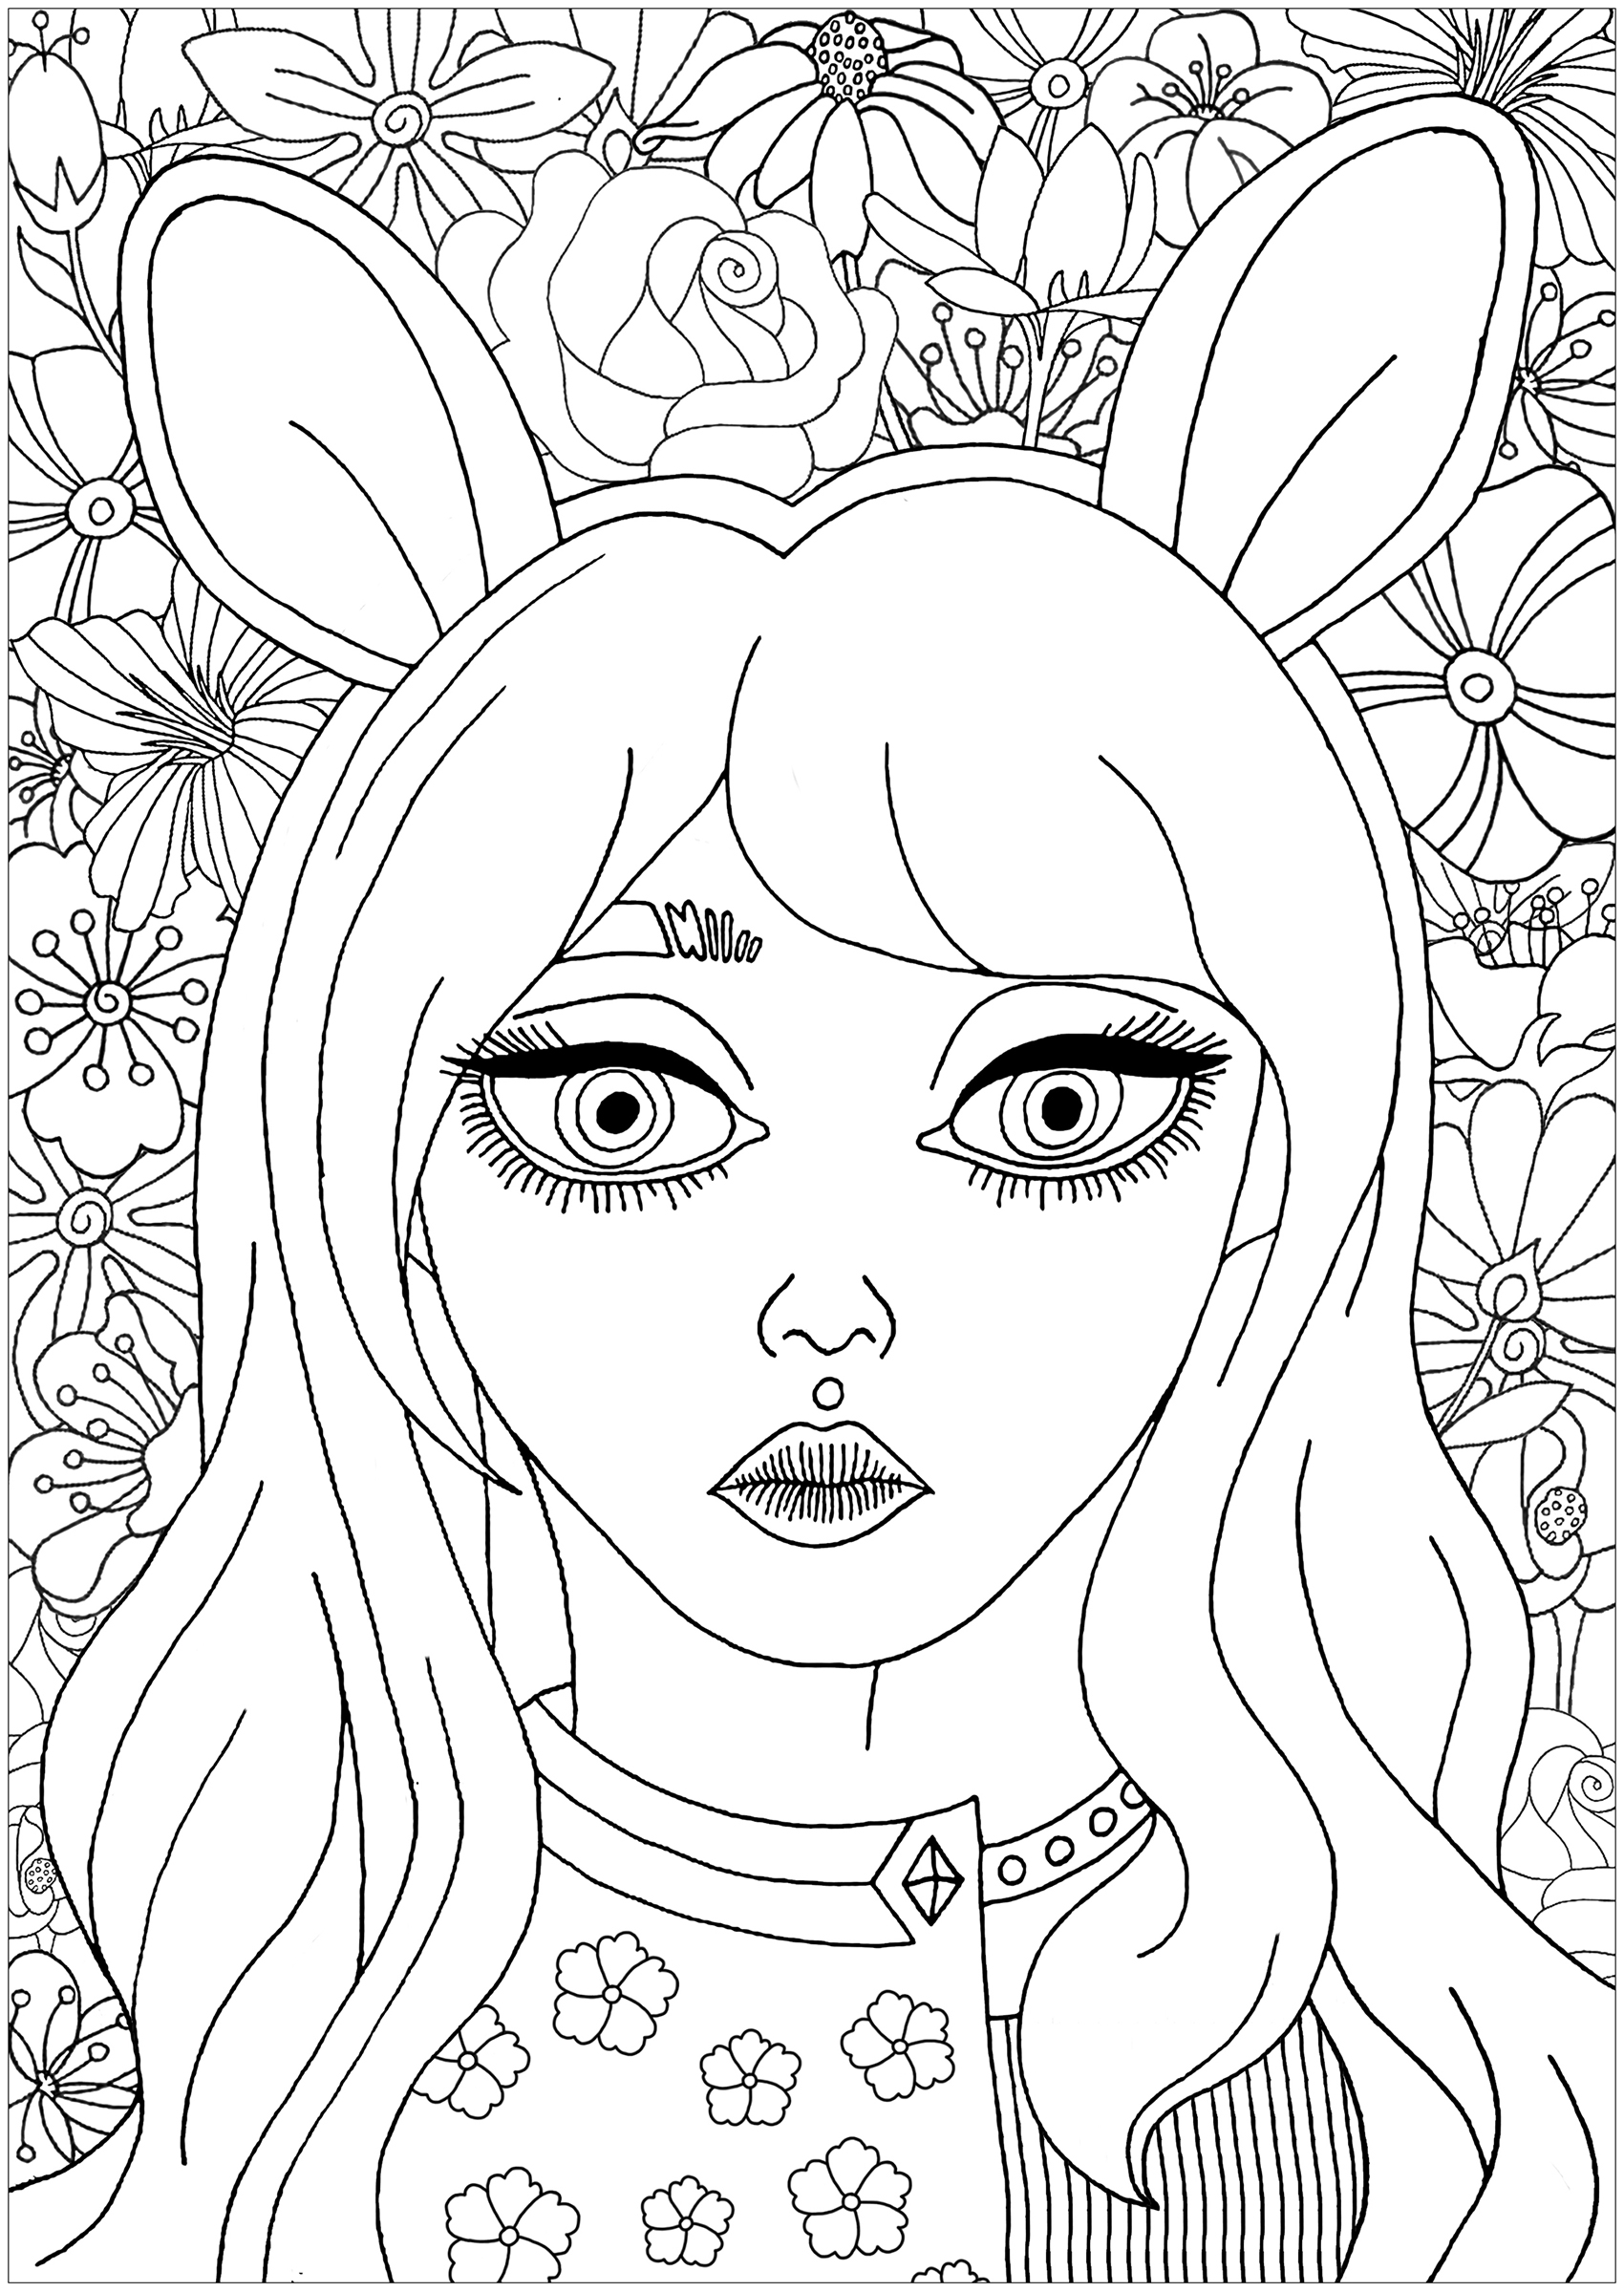 Cute portrait of a girl with bunny ears, with beautiful flowers for coloring in the background, Artist : Lucie